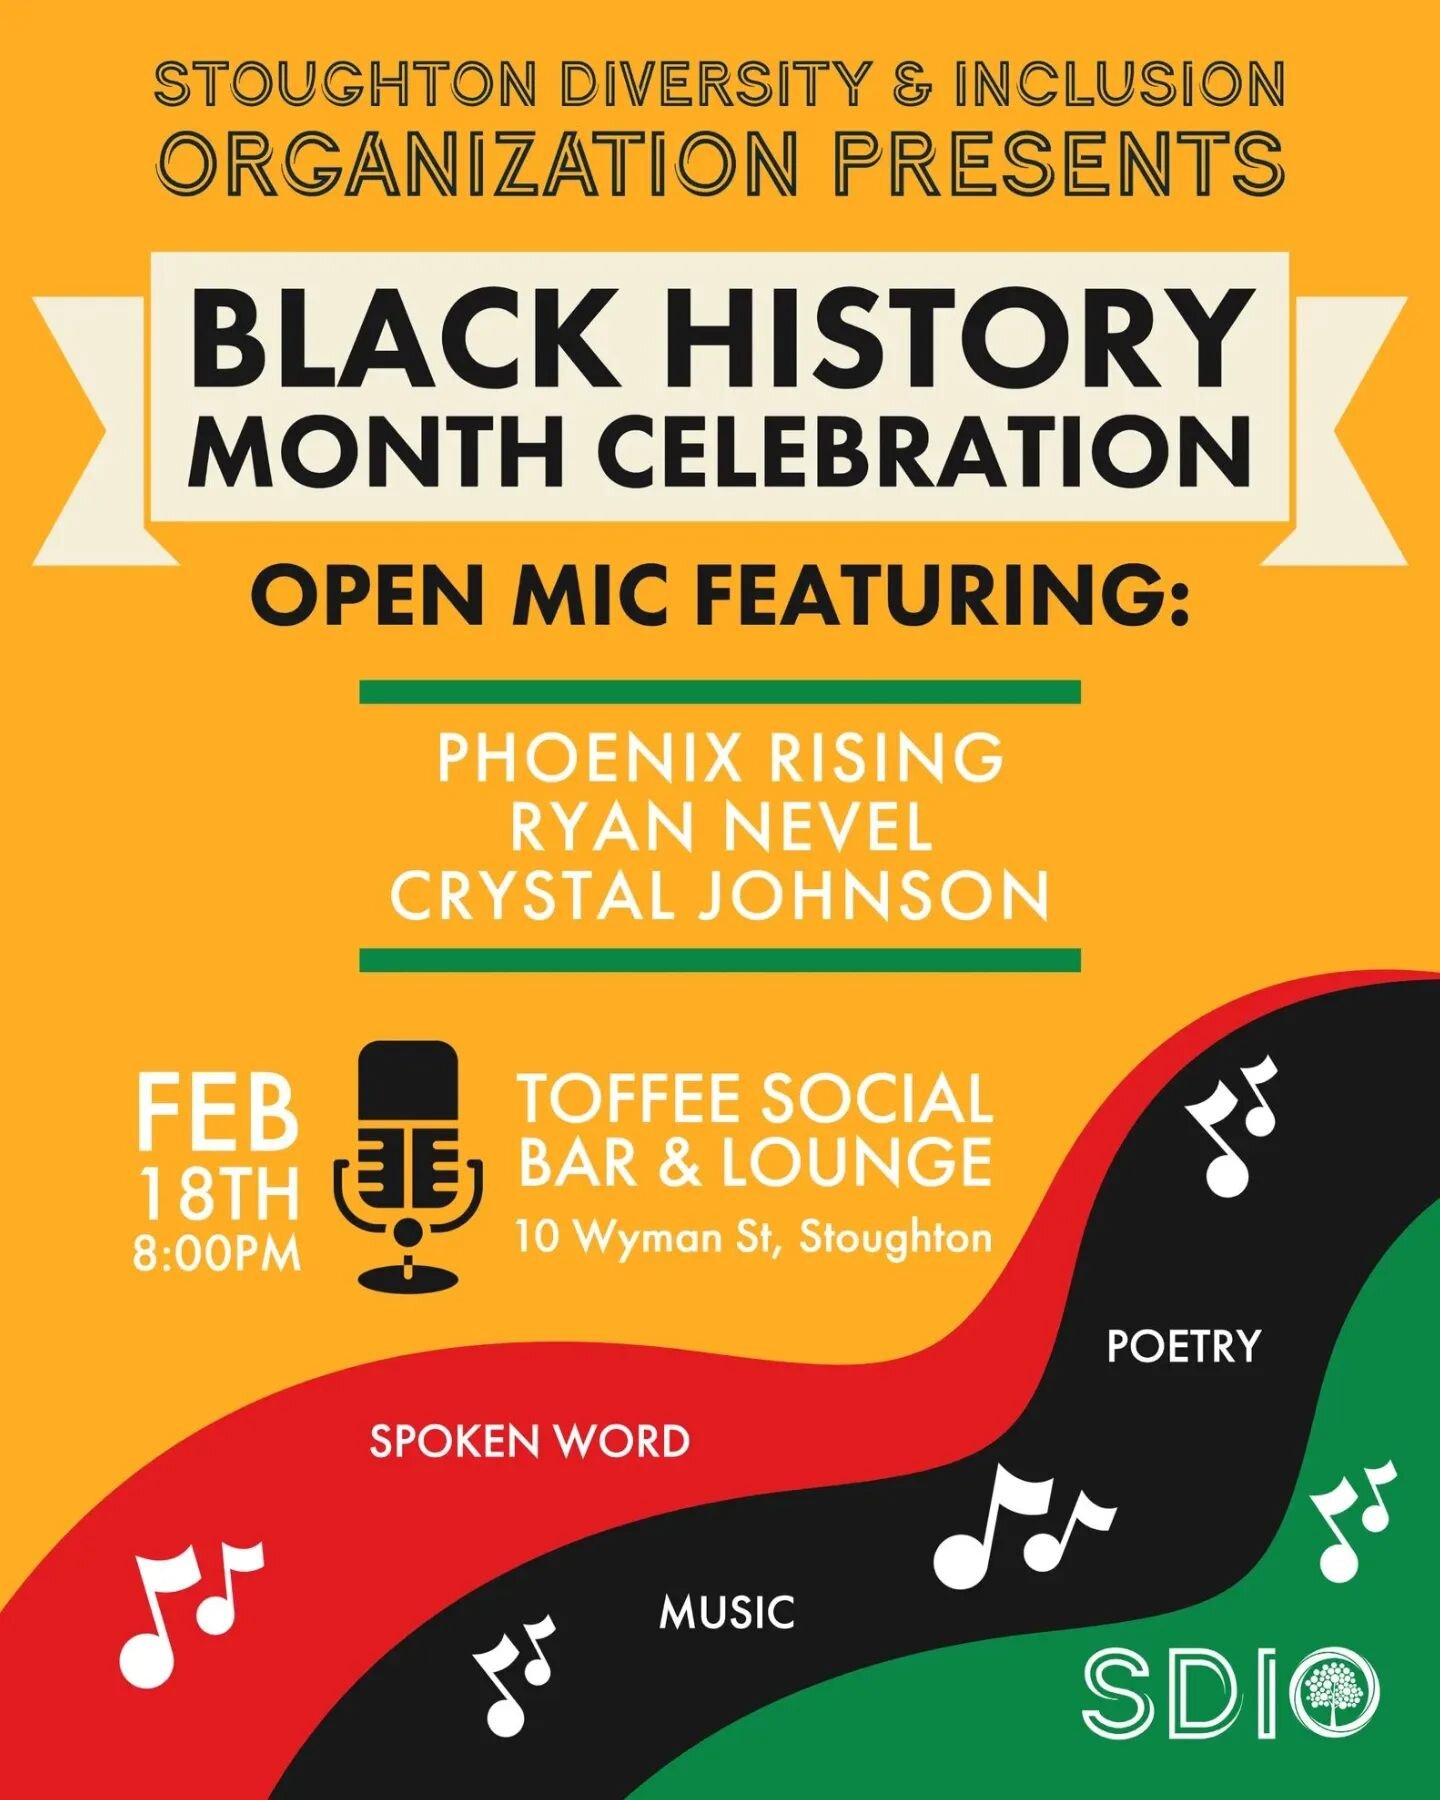 Stoughton Diversity &amp; Inclusion Organization presents Black History Month Celebration Open Mic featuring: Phoenix Rising, Ryan Nevel, &amp; Crystal Johnson.

Join us at @toffeesocial on Saturday, Feb 18th, at 8pm for some spoken word, music, and 